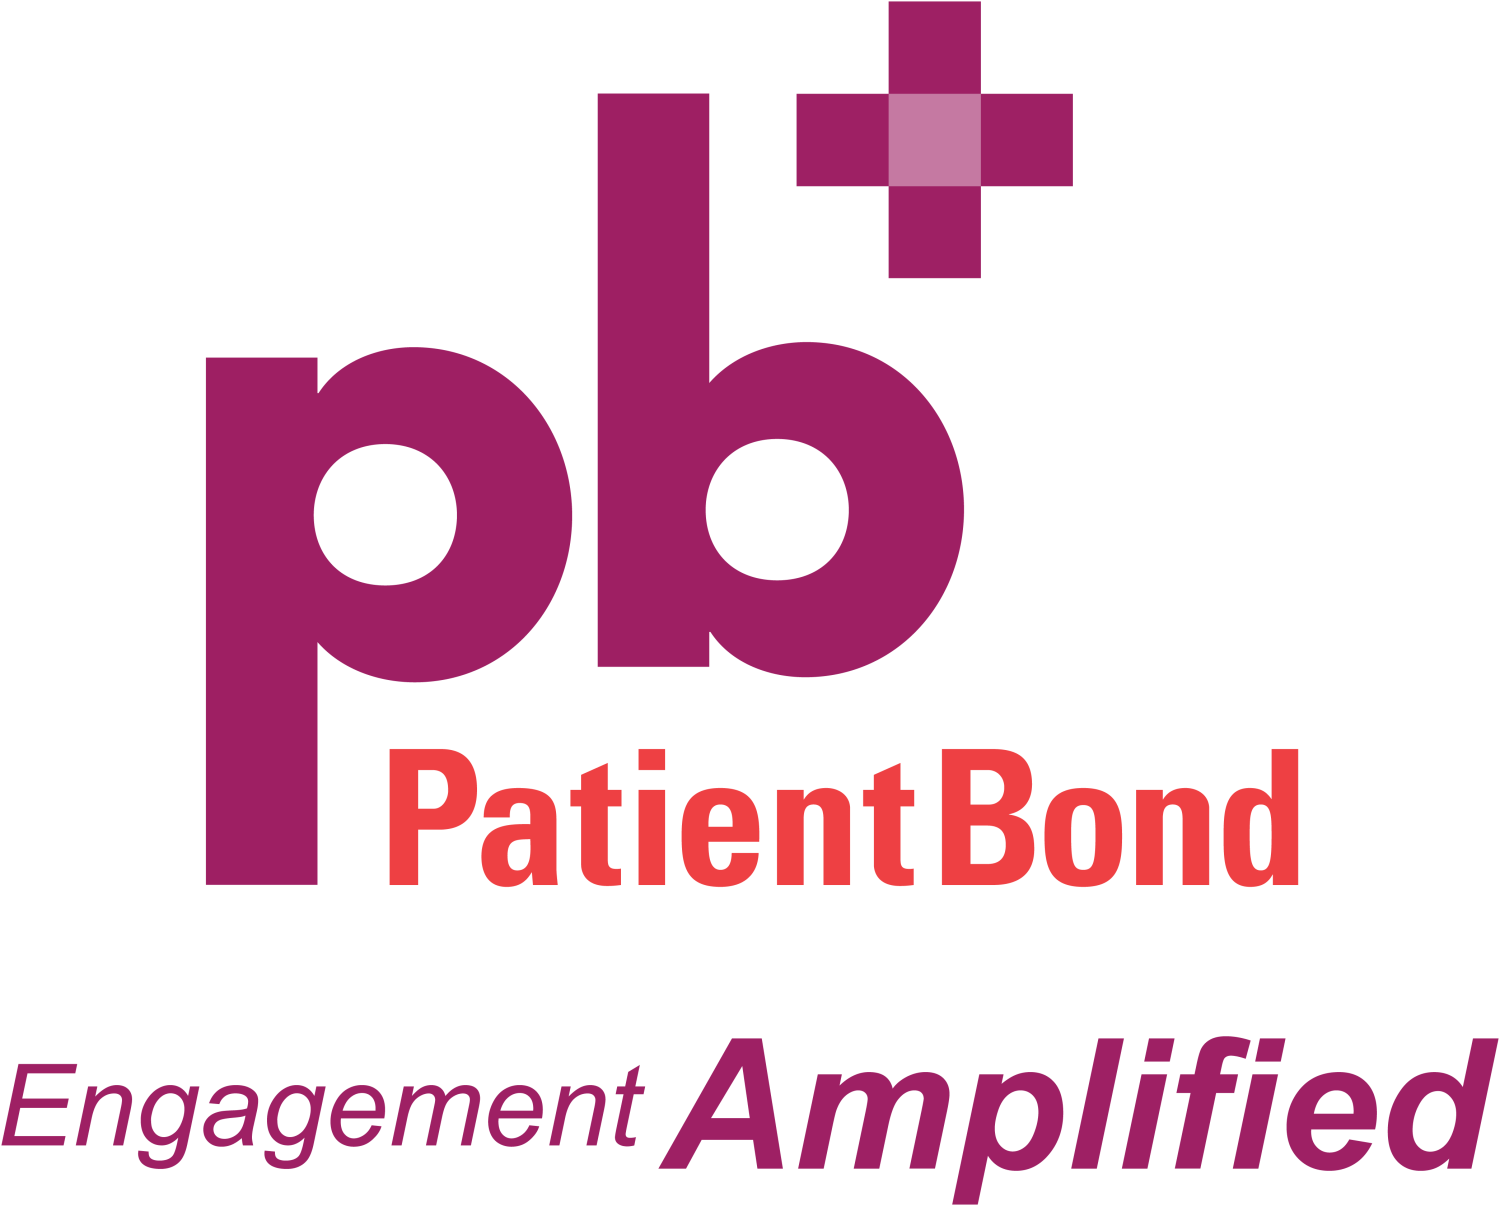  PB_LOGO_PNG_In_W4179_H3359_With_300DPIResolution